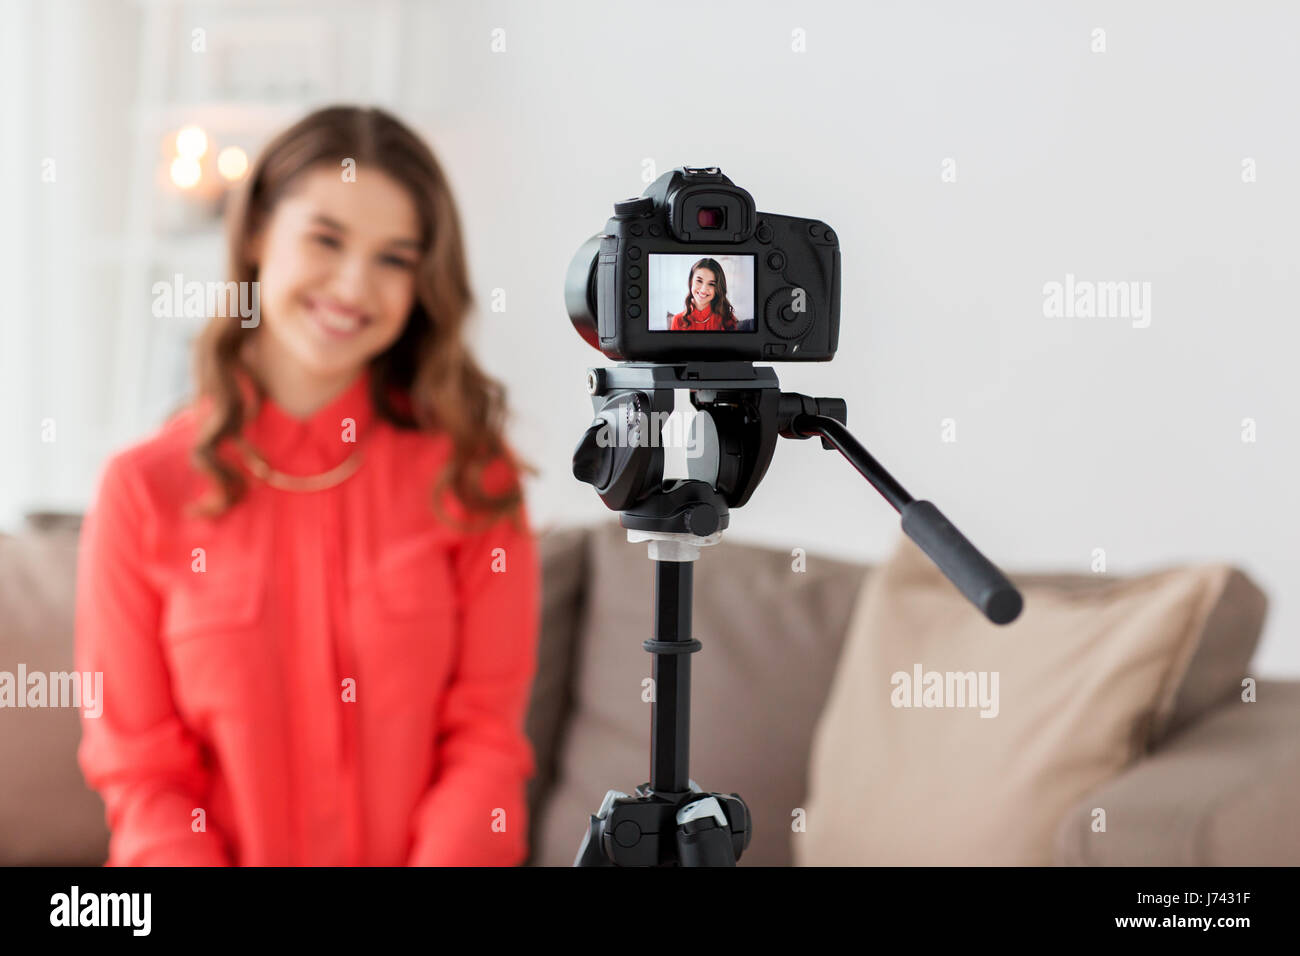 woman with camera recording video at home Stock Photo